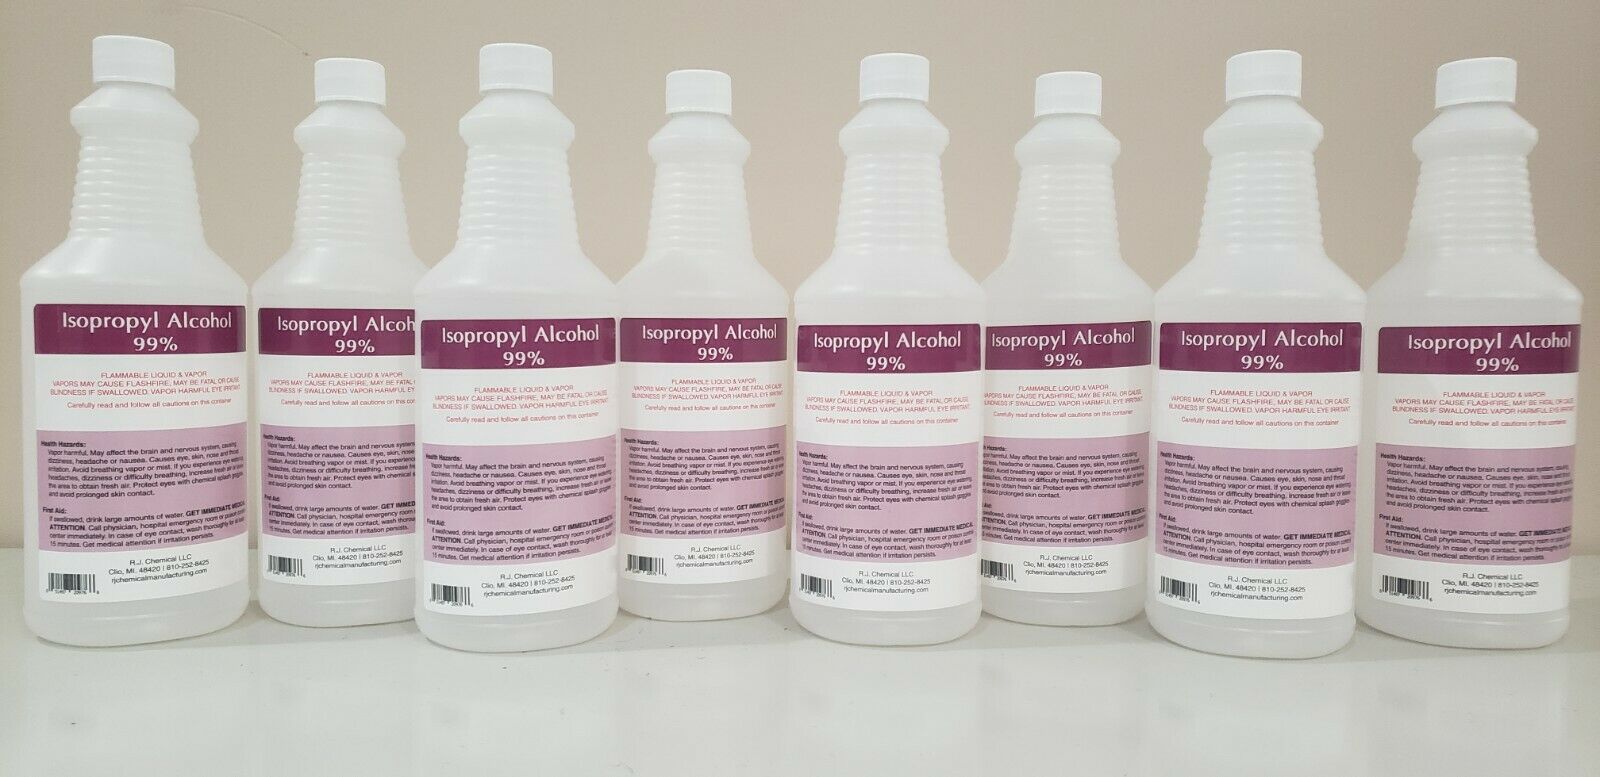 Isopropyl Alcohol 99% - No Impurities 2 Gallons Packed In 8 Quart Bottle